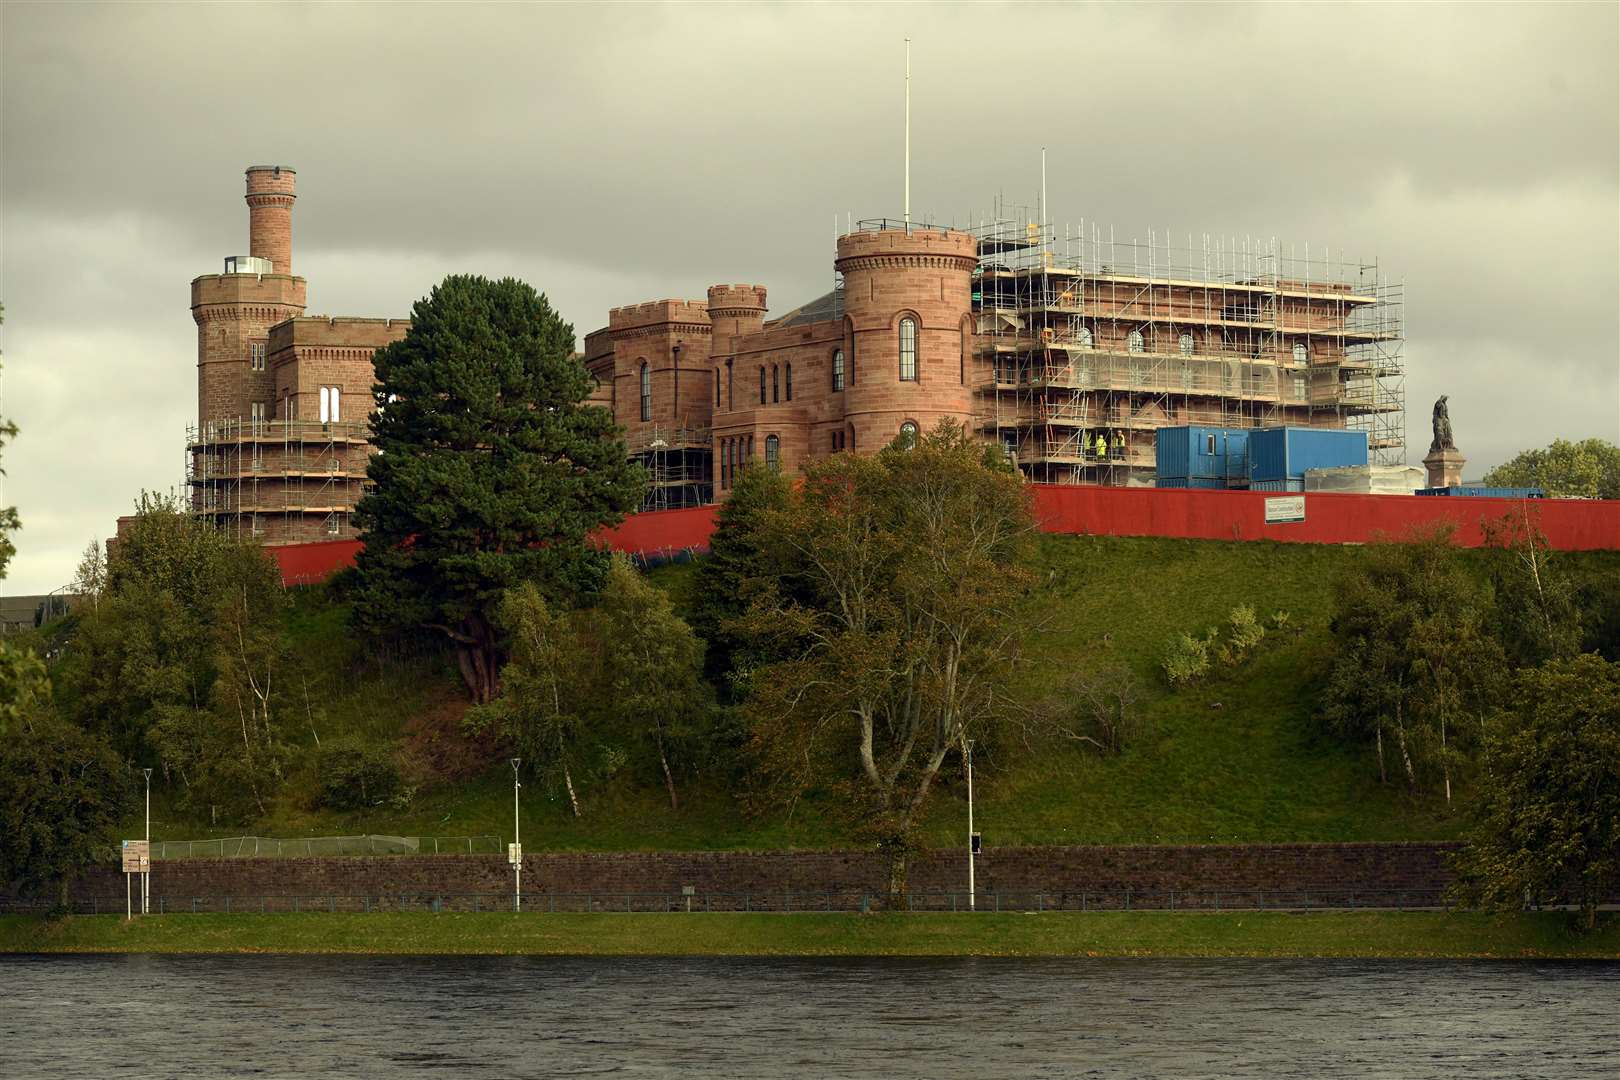 Inverness Castle is being transformed into a visitor attraction which is due to open in 2025.